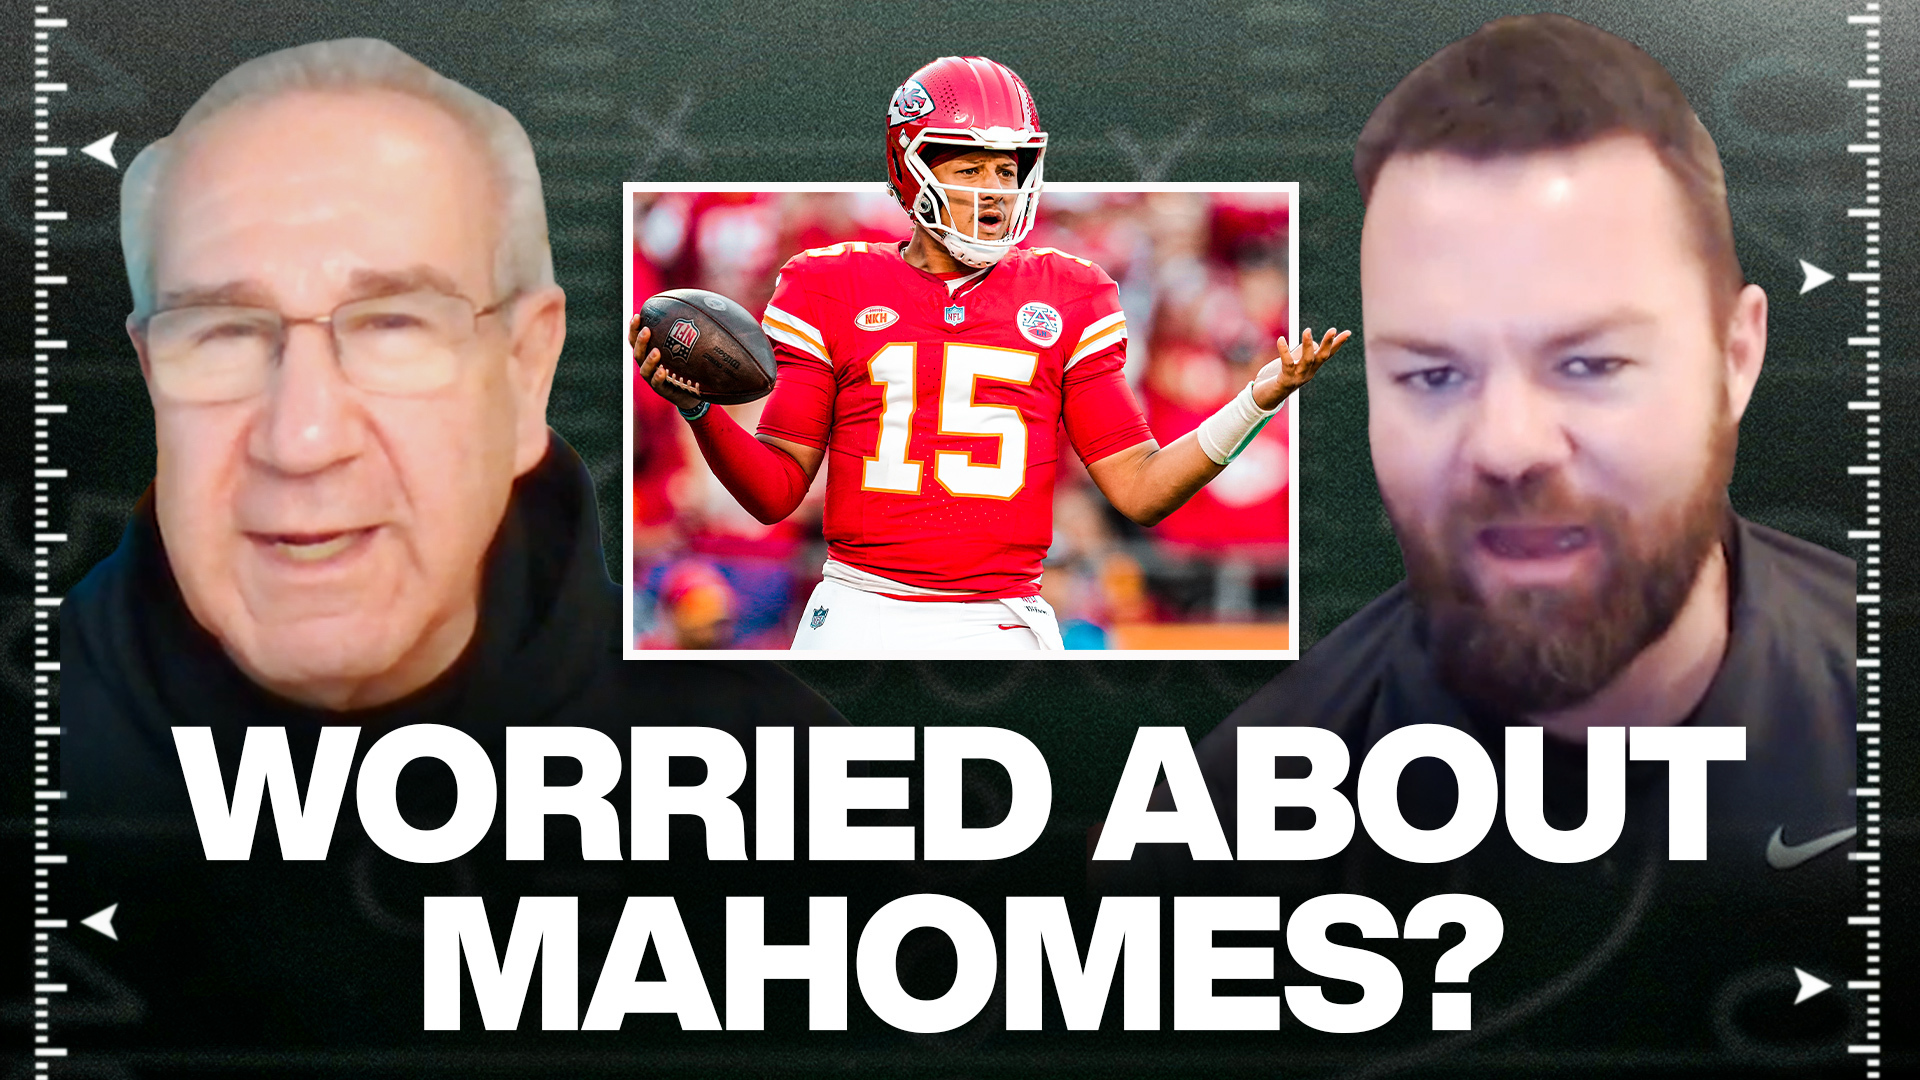 Screenshot of Greg Cosell on left and Andy Benoit on right, with an inserted image of Patrick Mahomes in the center. Text reads: "Worried About Mahomes?"